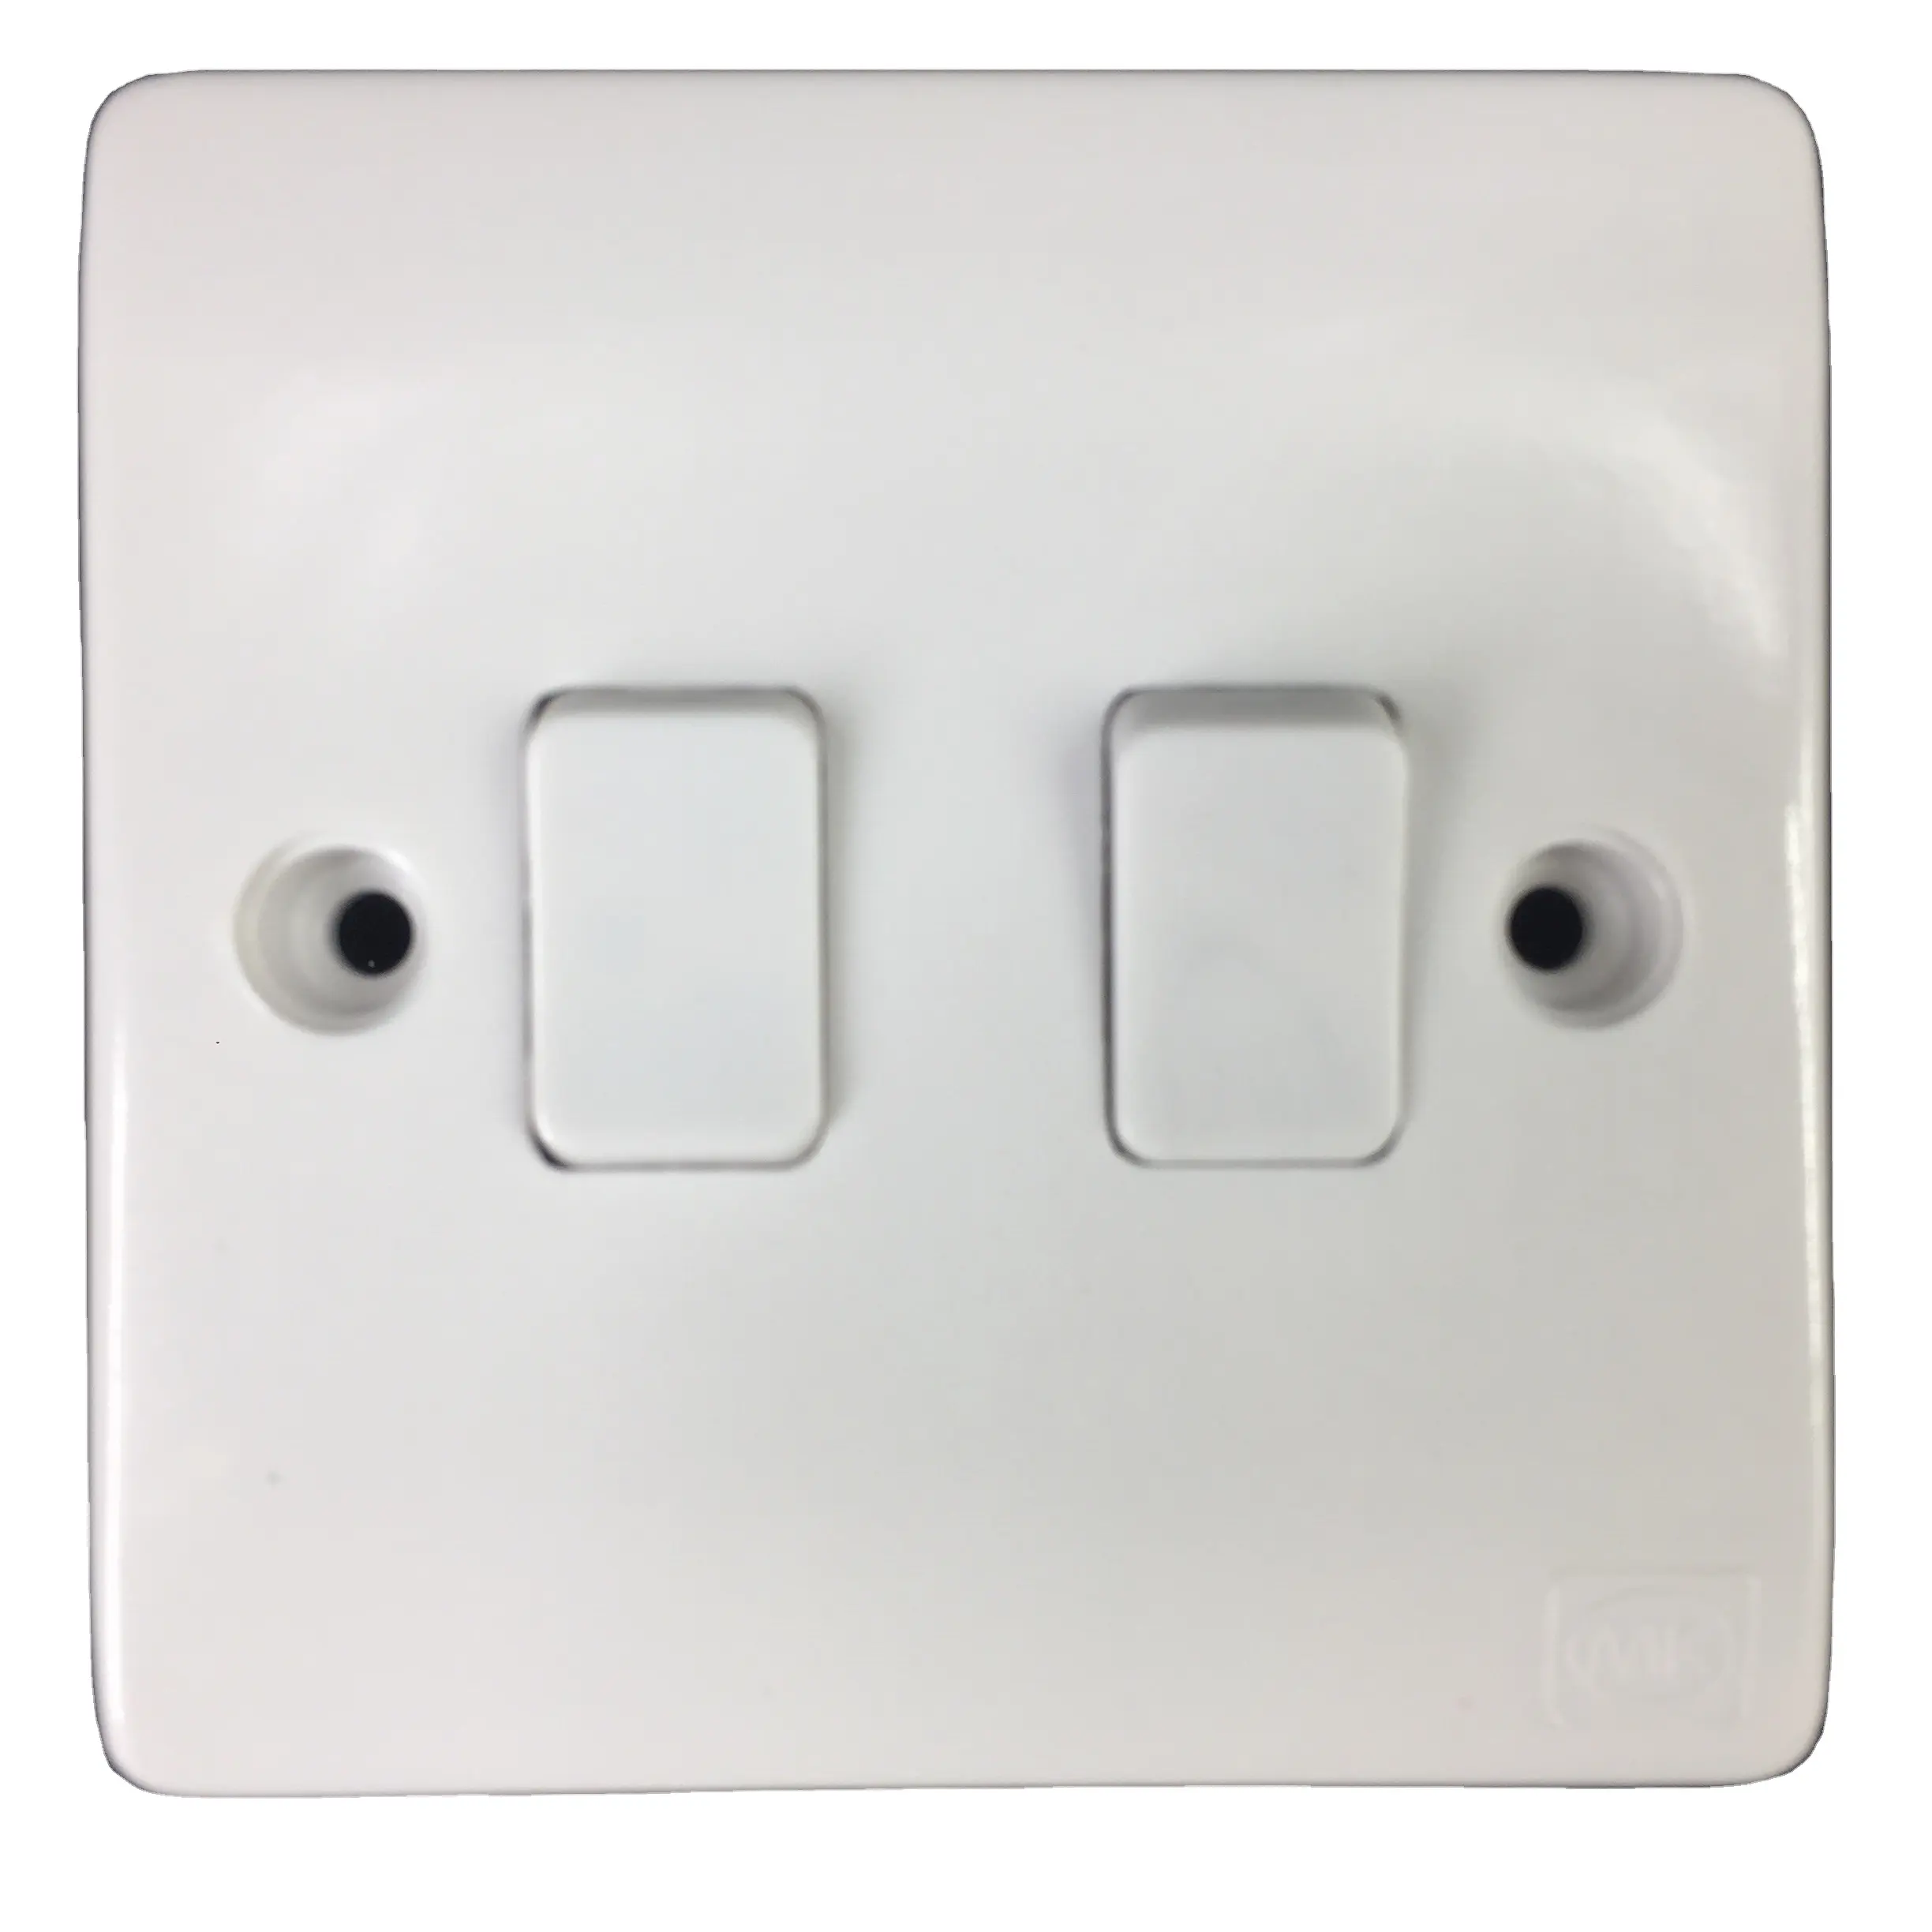 HIgh quality 2gang 1way white color Electrical Logic MK switch socket